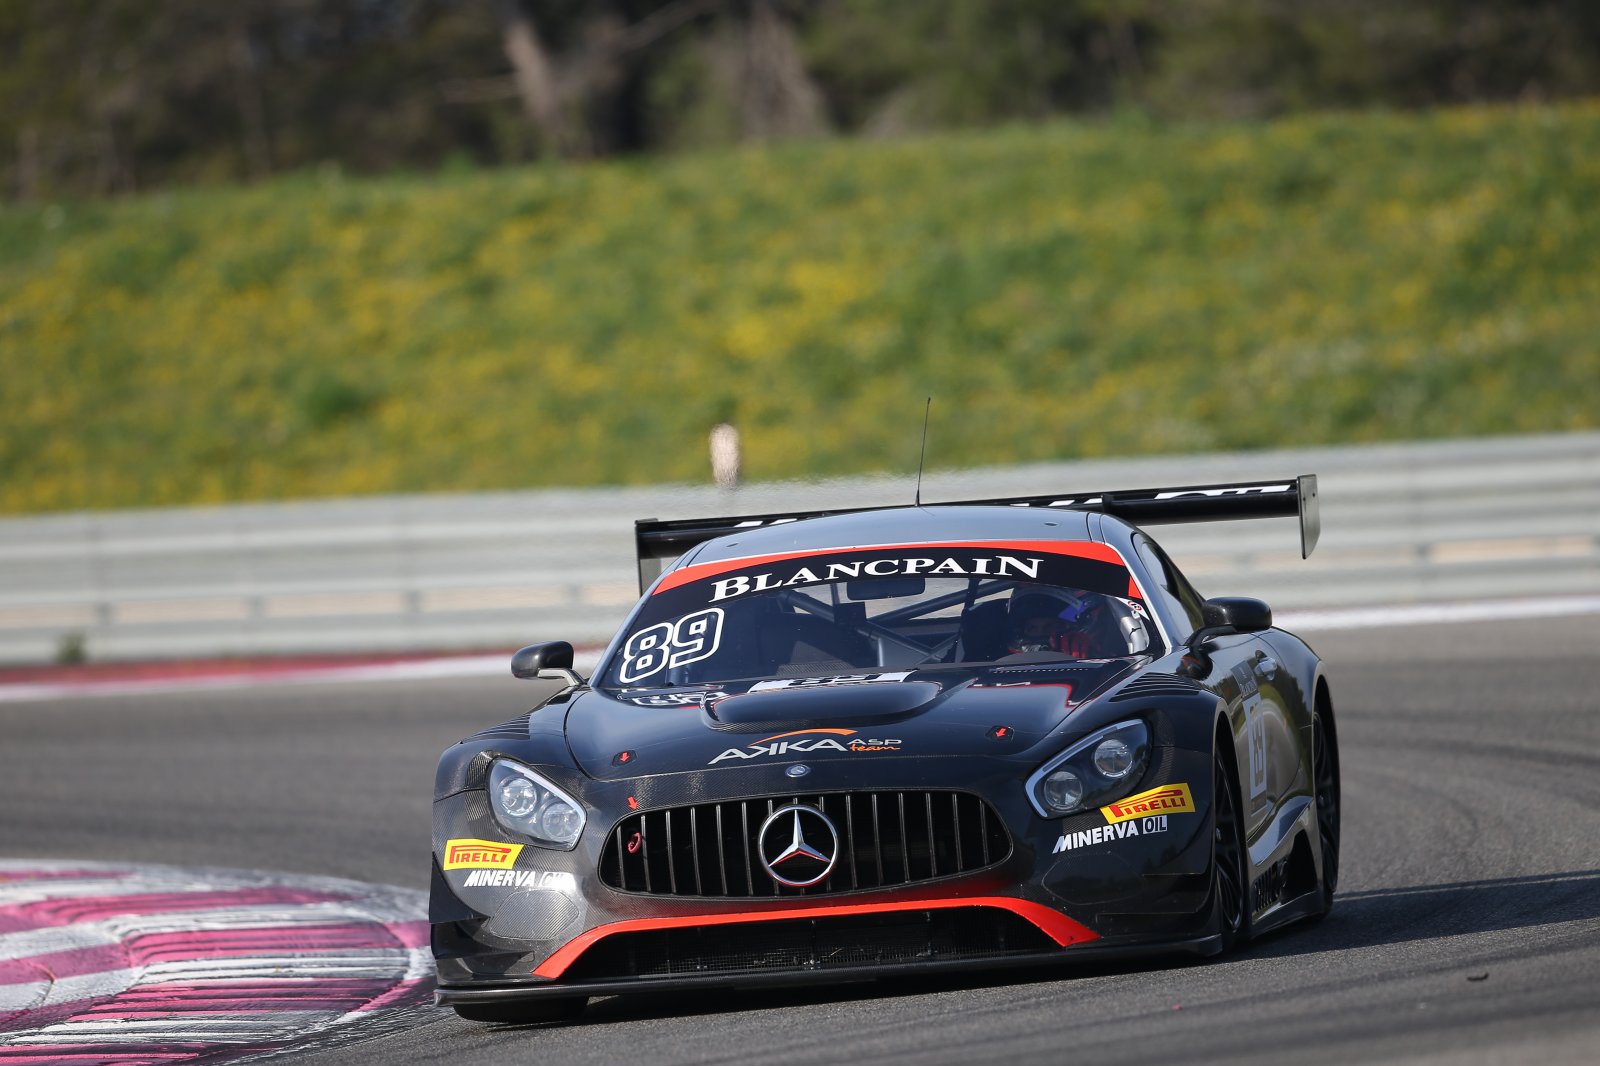 Mercedes-AMG fastest after two days of intensive testing